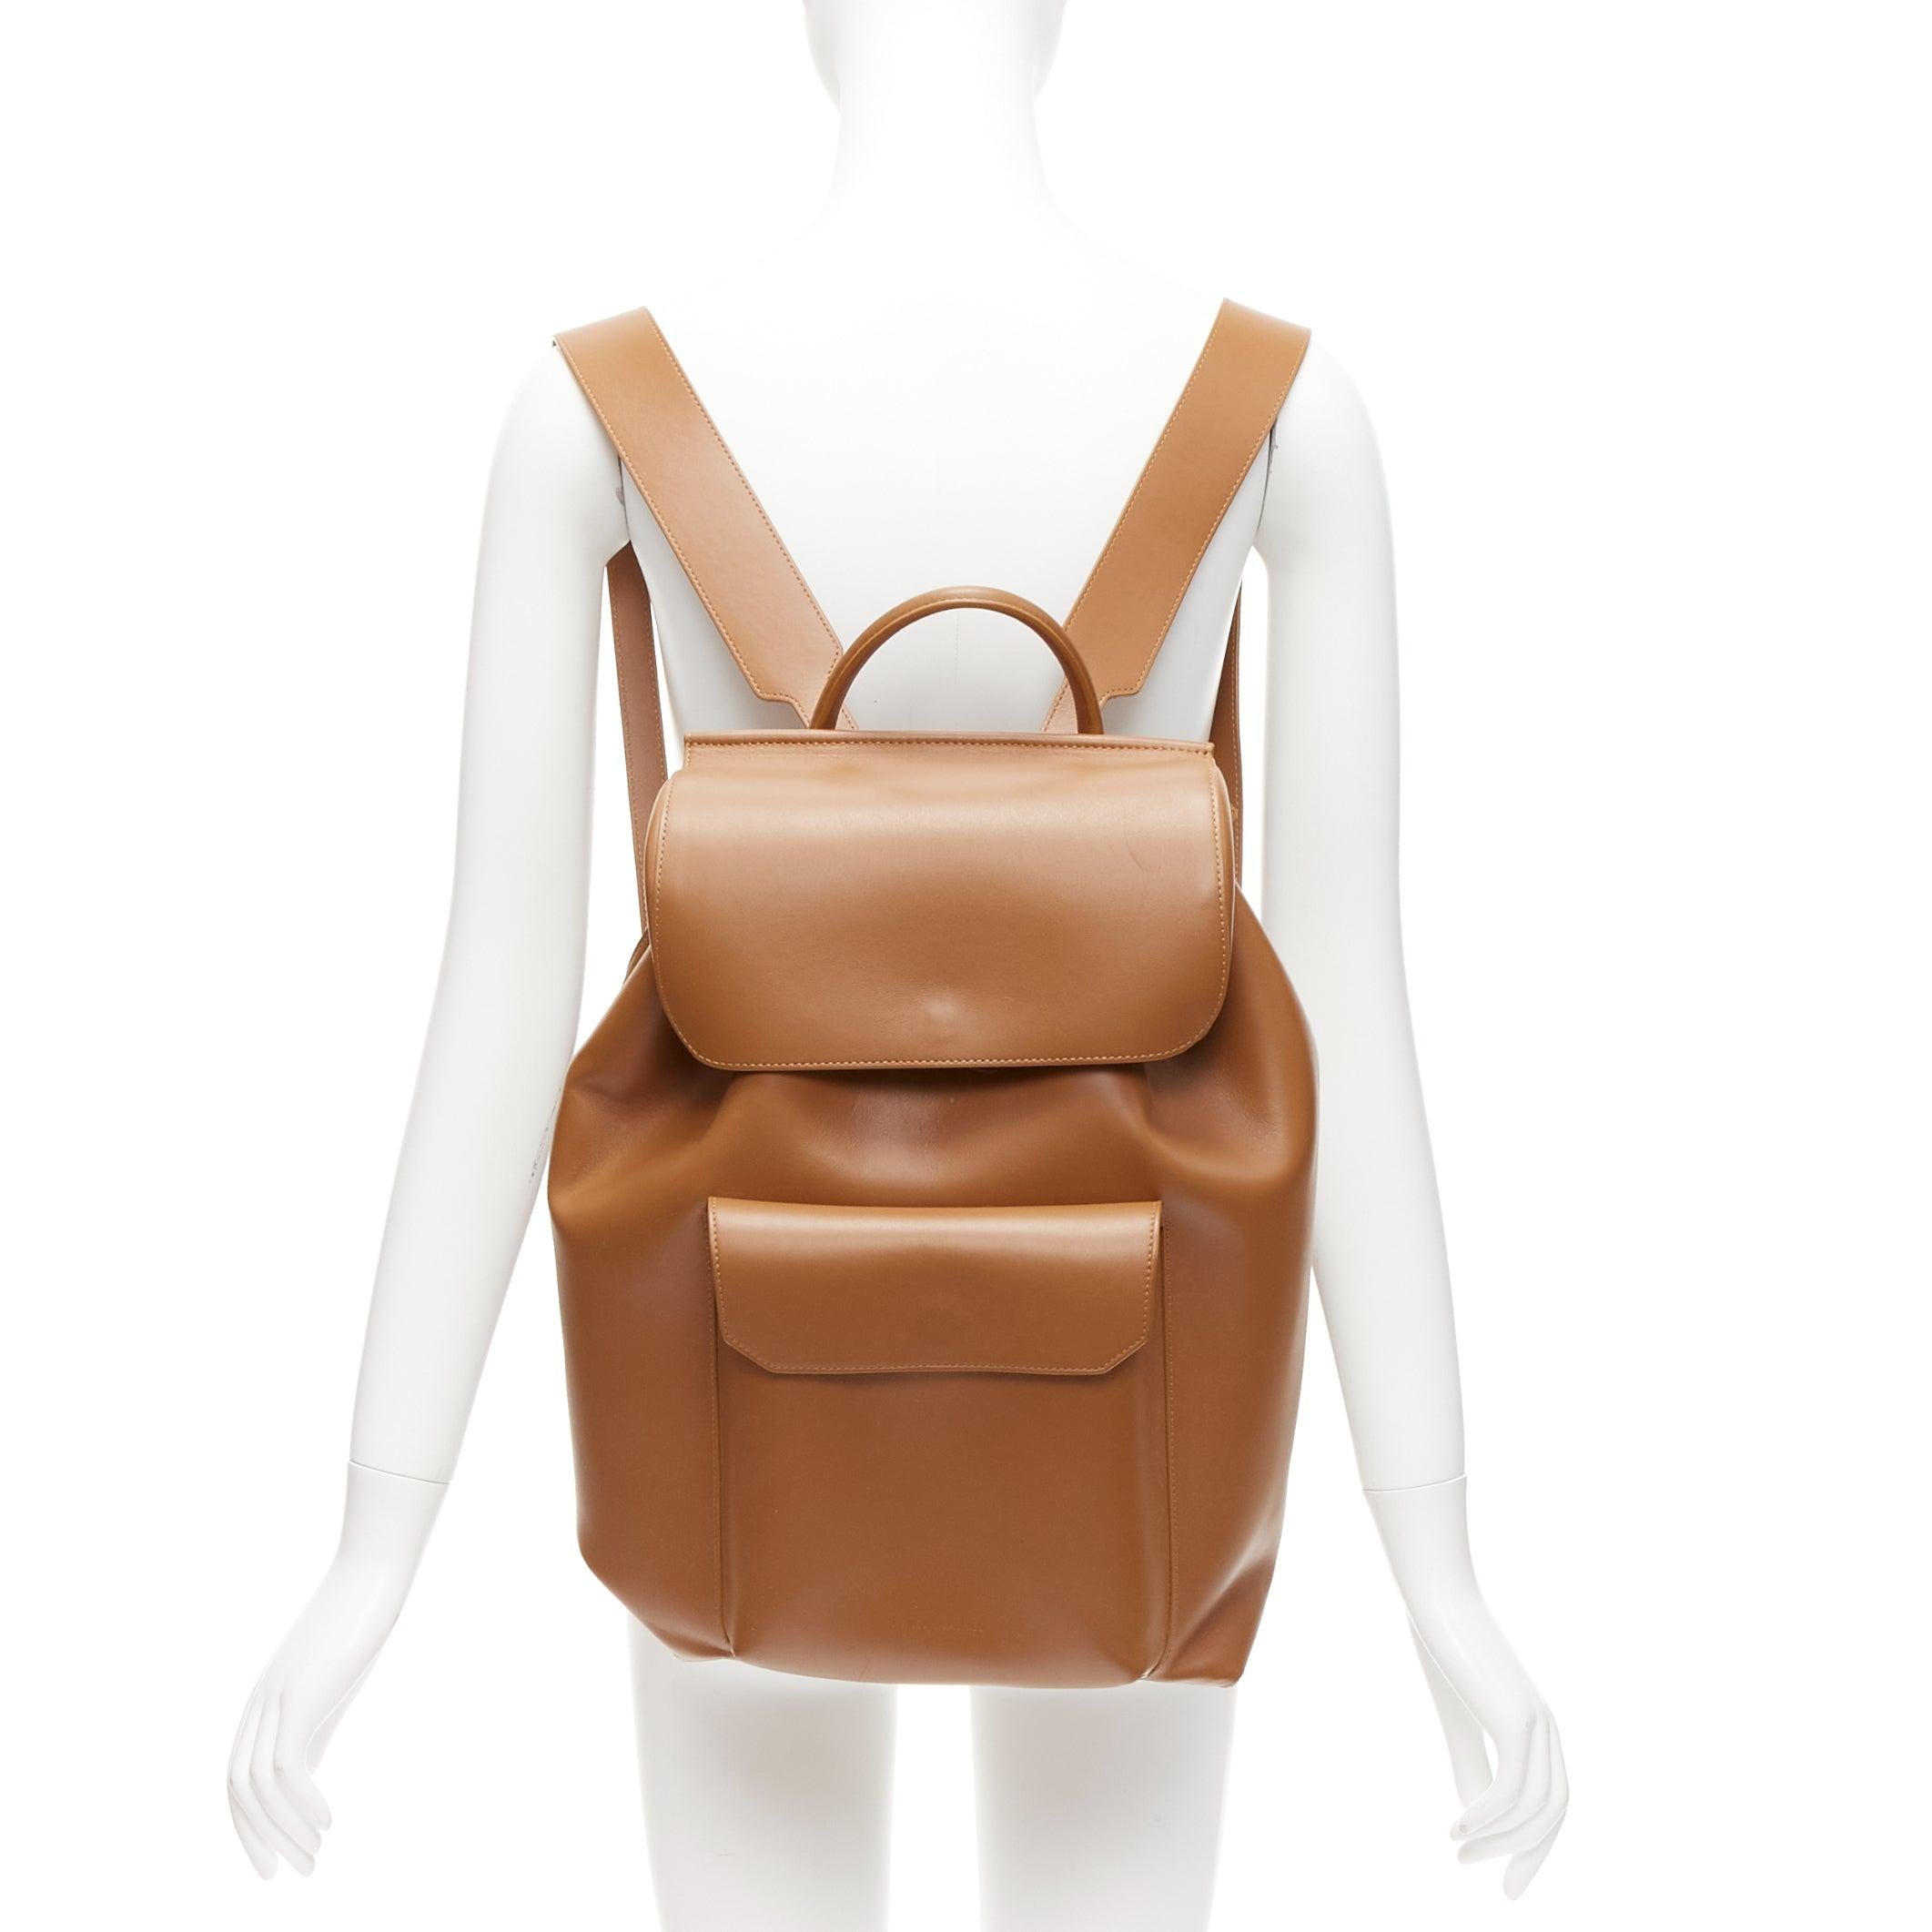 MANSUR GAVRIEL vegetable tanned calfskin leather minimal classic backpack bag
Reference: JACG/A00098
Brand: Mansur Gavriel
Material: Leather
Color: Brown
Pattern: Solid
Closure: Snap Buttons
Lining: Beige Fabric
Extra Details: Vegetable Tanned